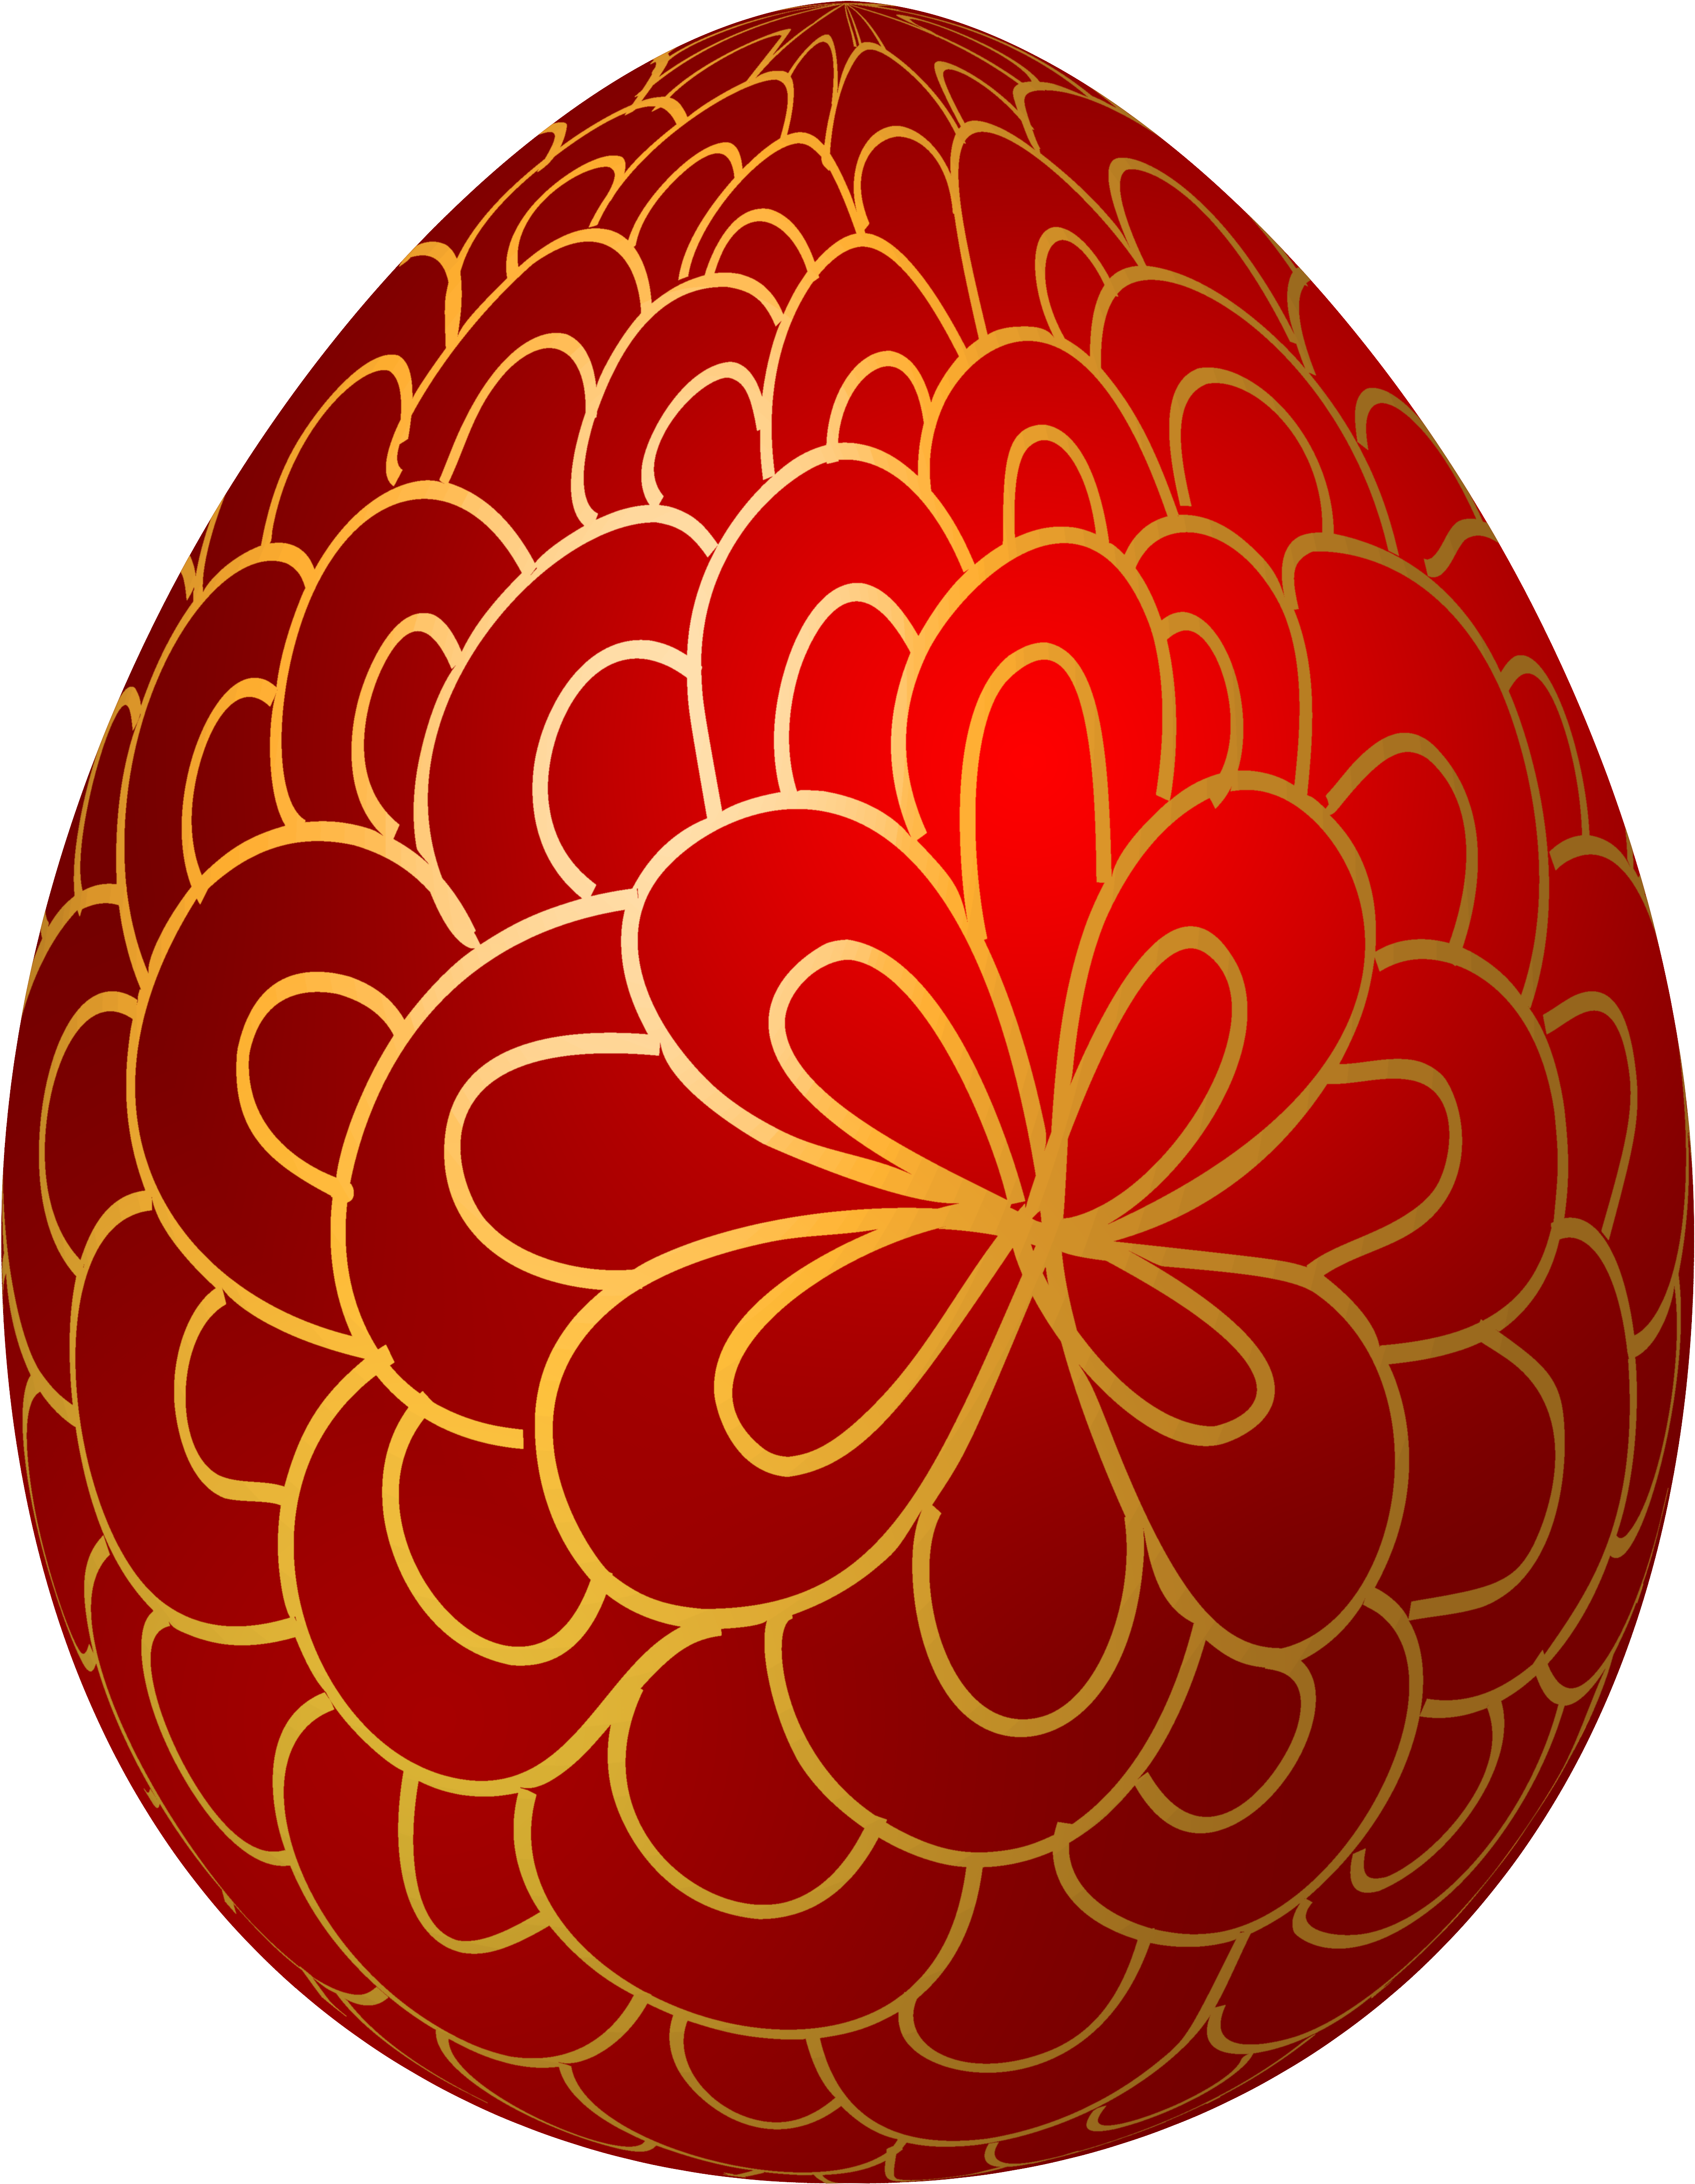 A Red Egg With Gold Outline